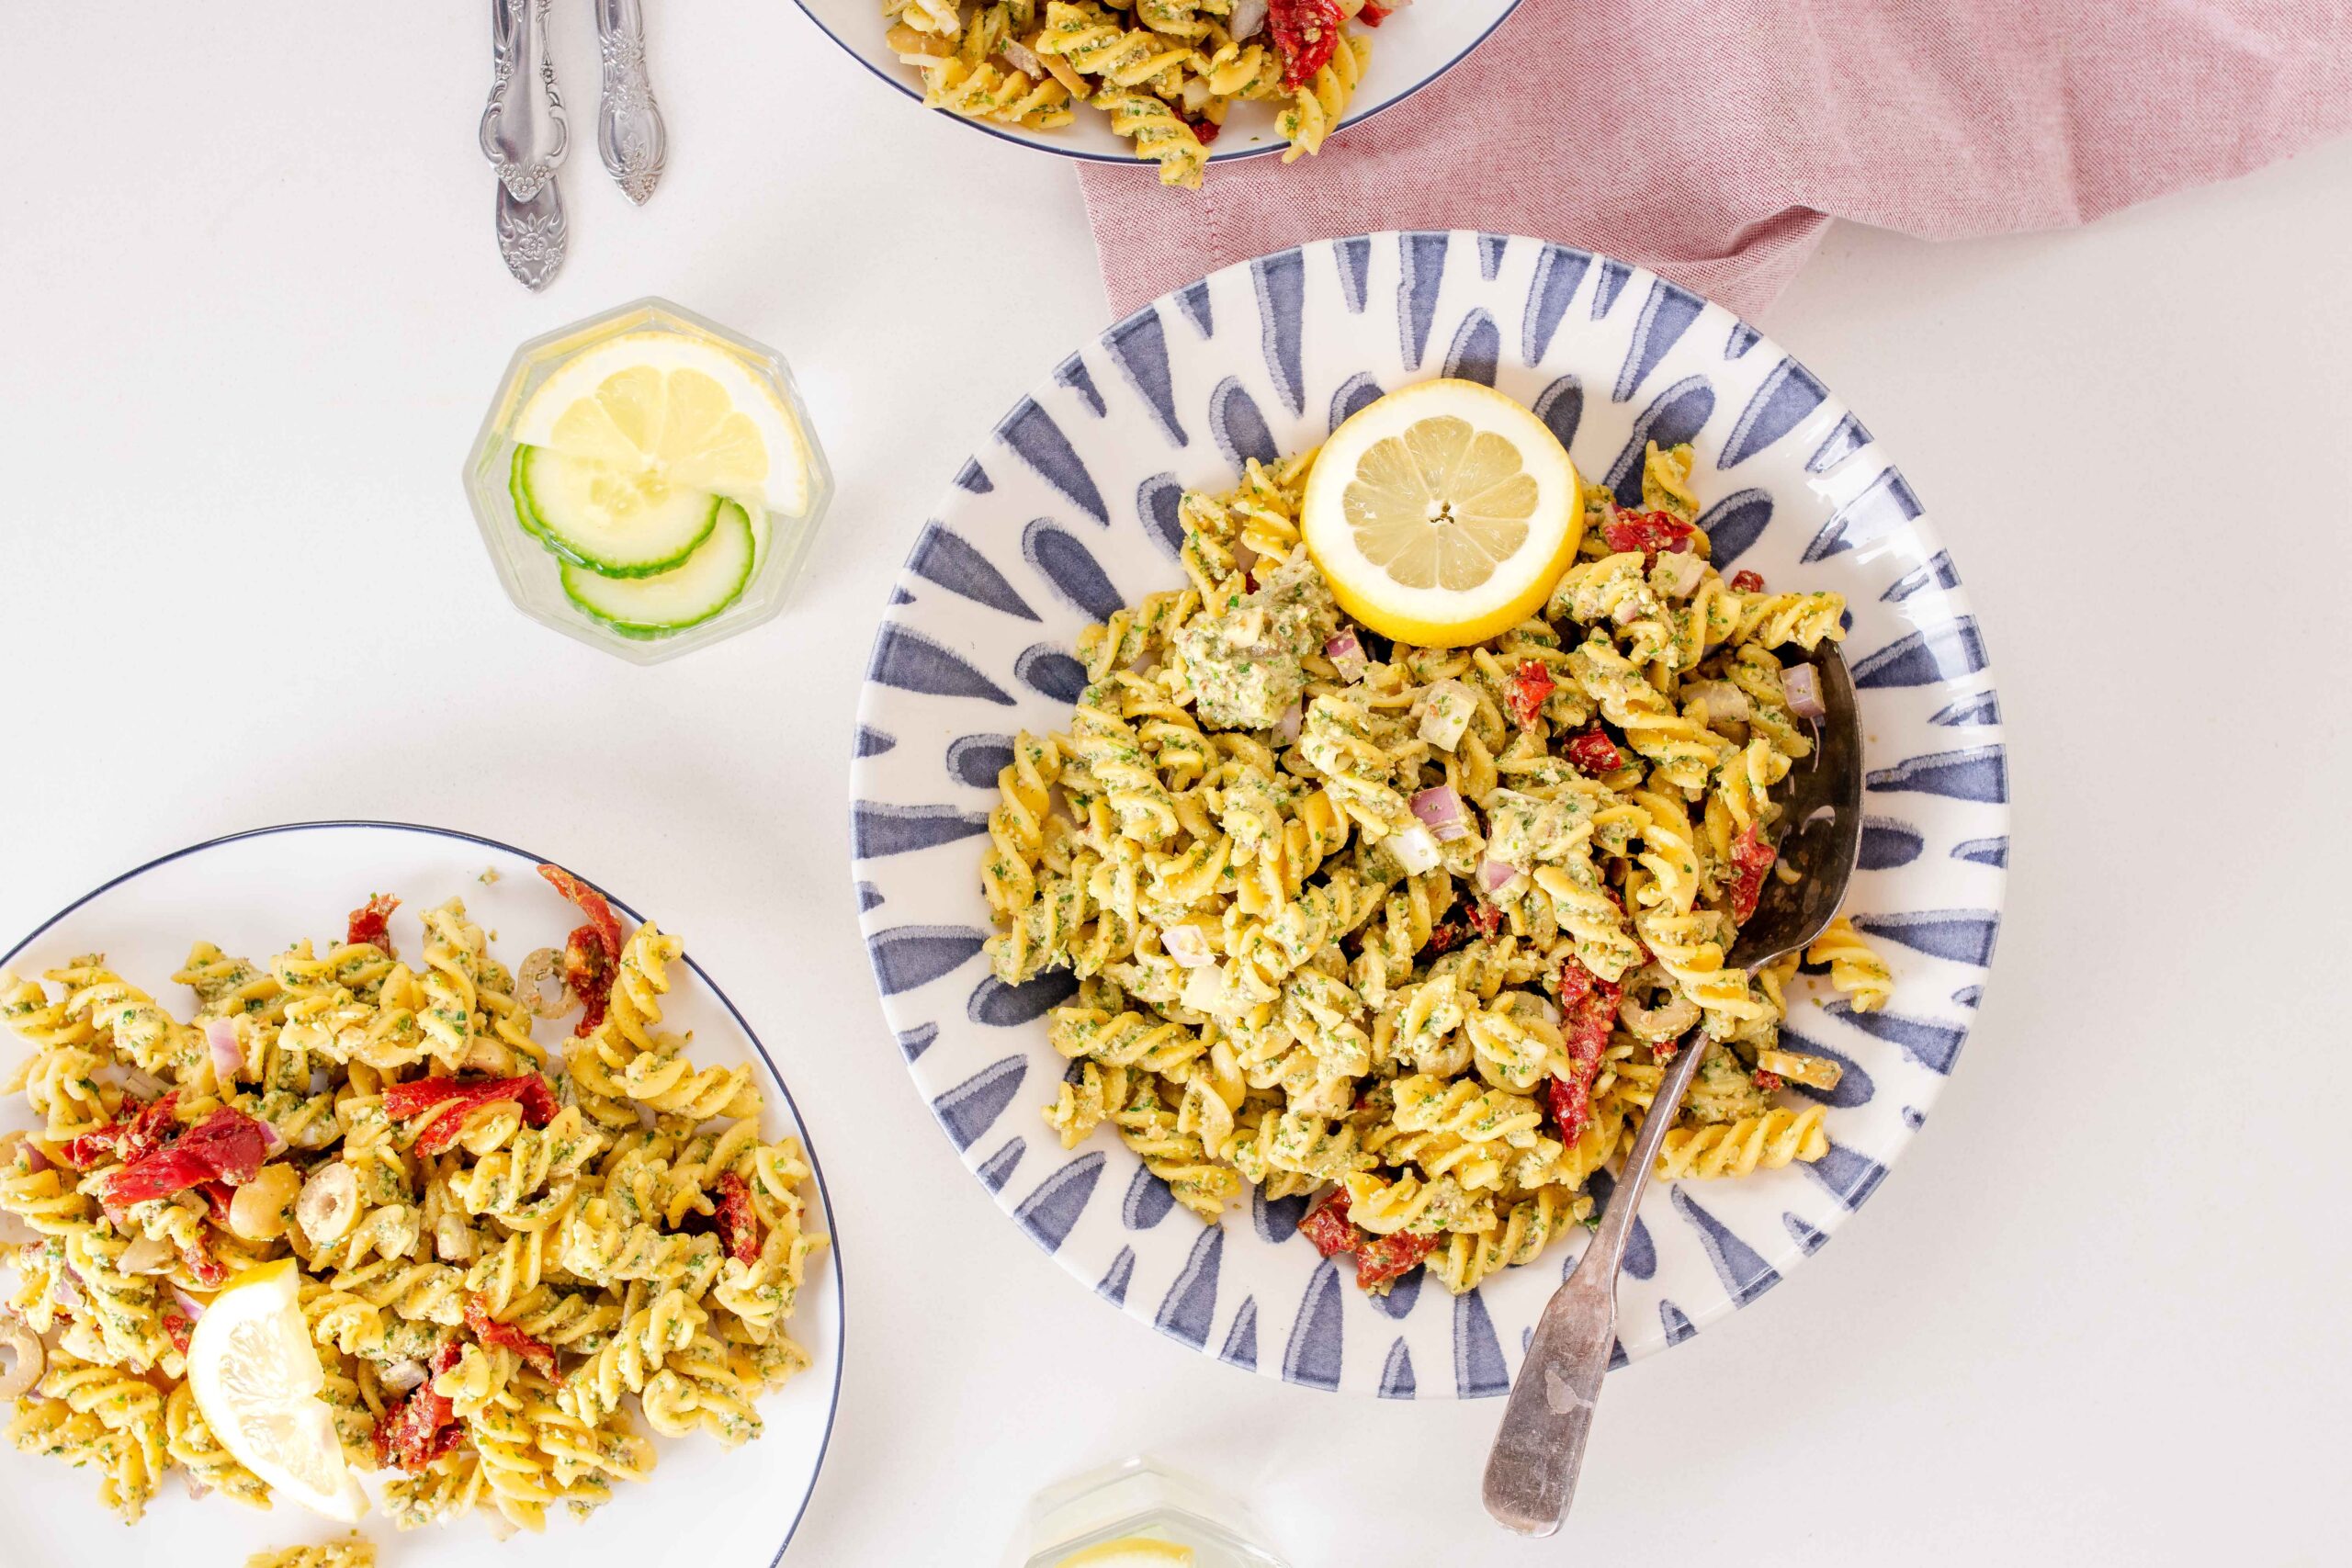 fusilli pasta with pesto, red onion, olives, sundried tomatoes and lemon slice